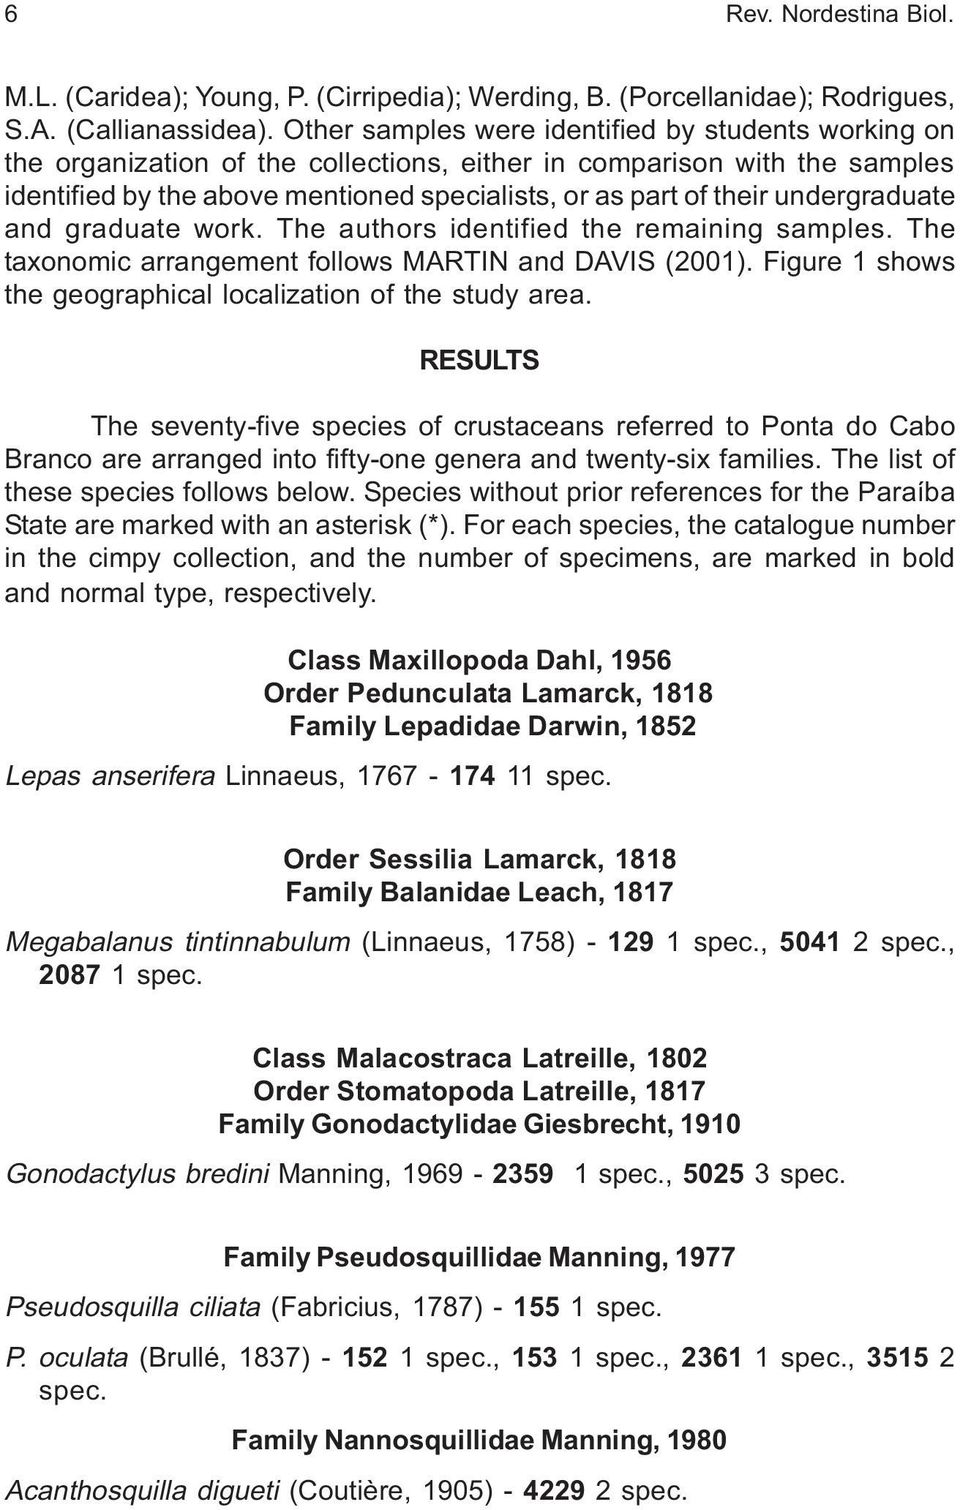 undergraduate and graduate work. The authors identified the remaining samples. The taxonomic arrangement follows MARTIN and DAVIS (2001).